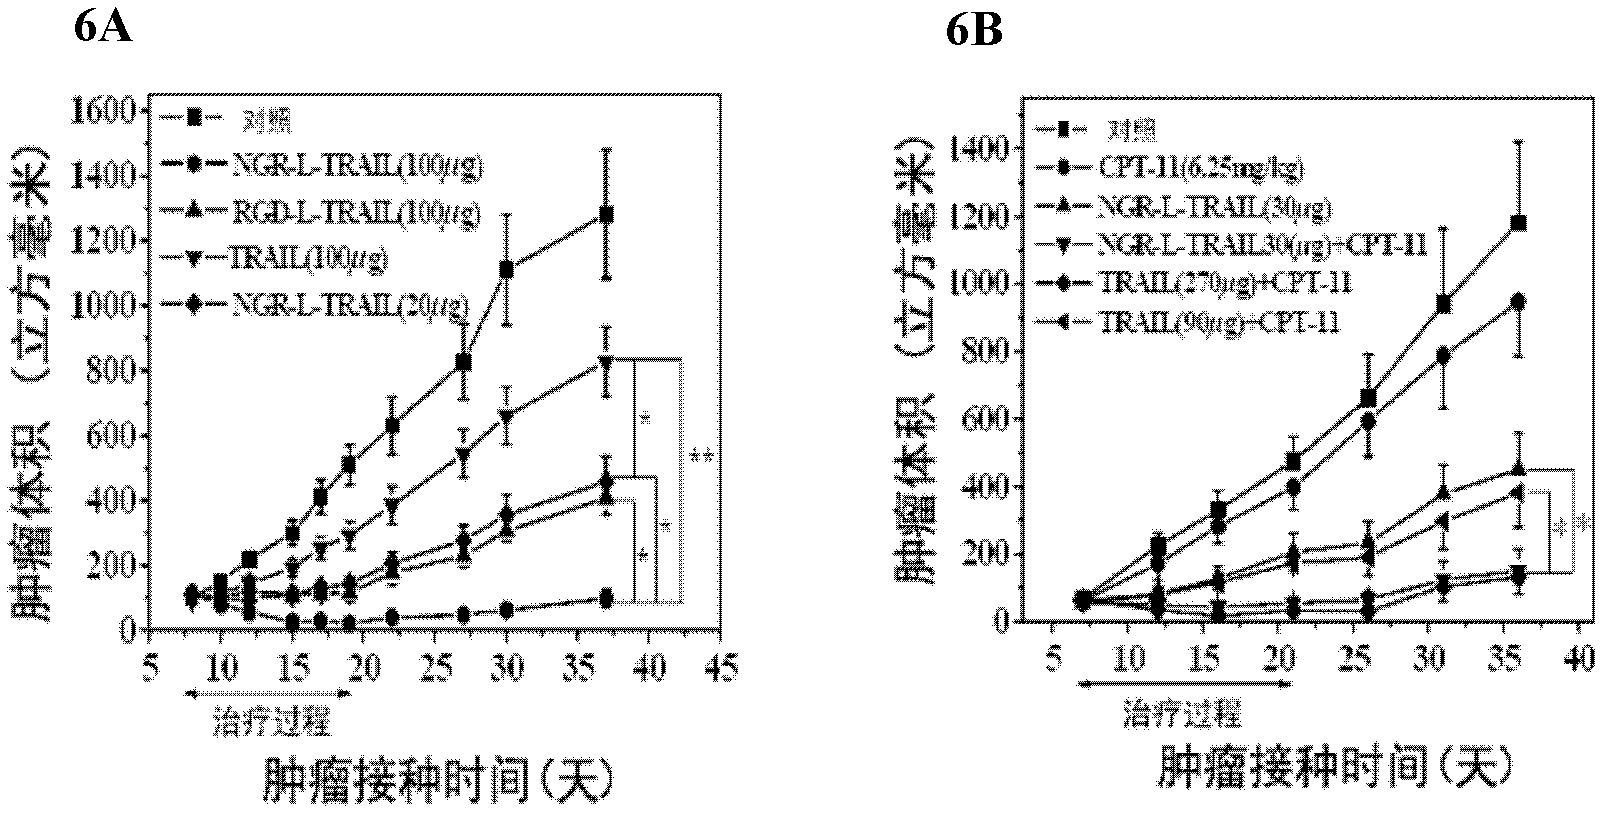 Tumor targeting tumor necrosis factor related apoptosis ligand variant and application thereof